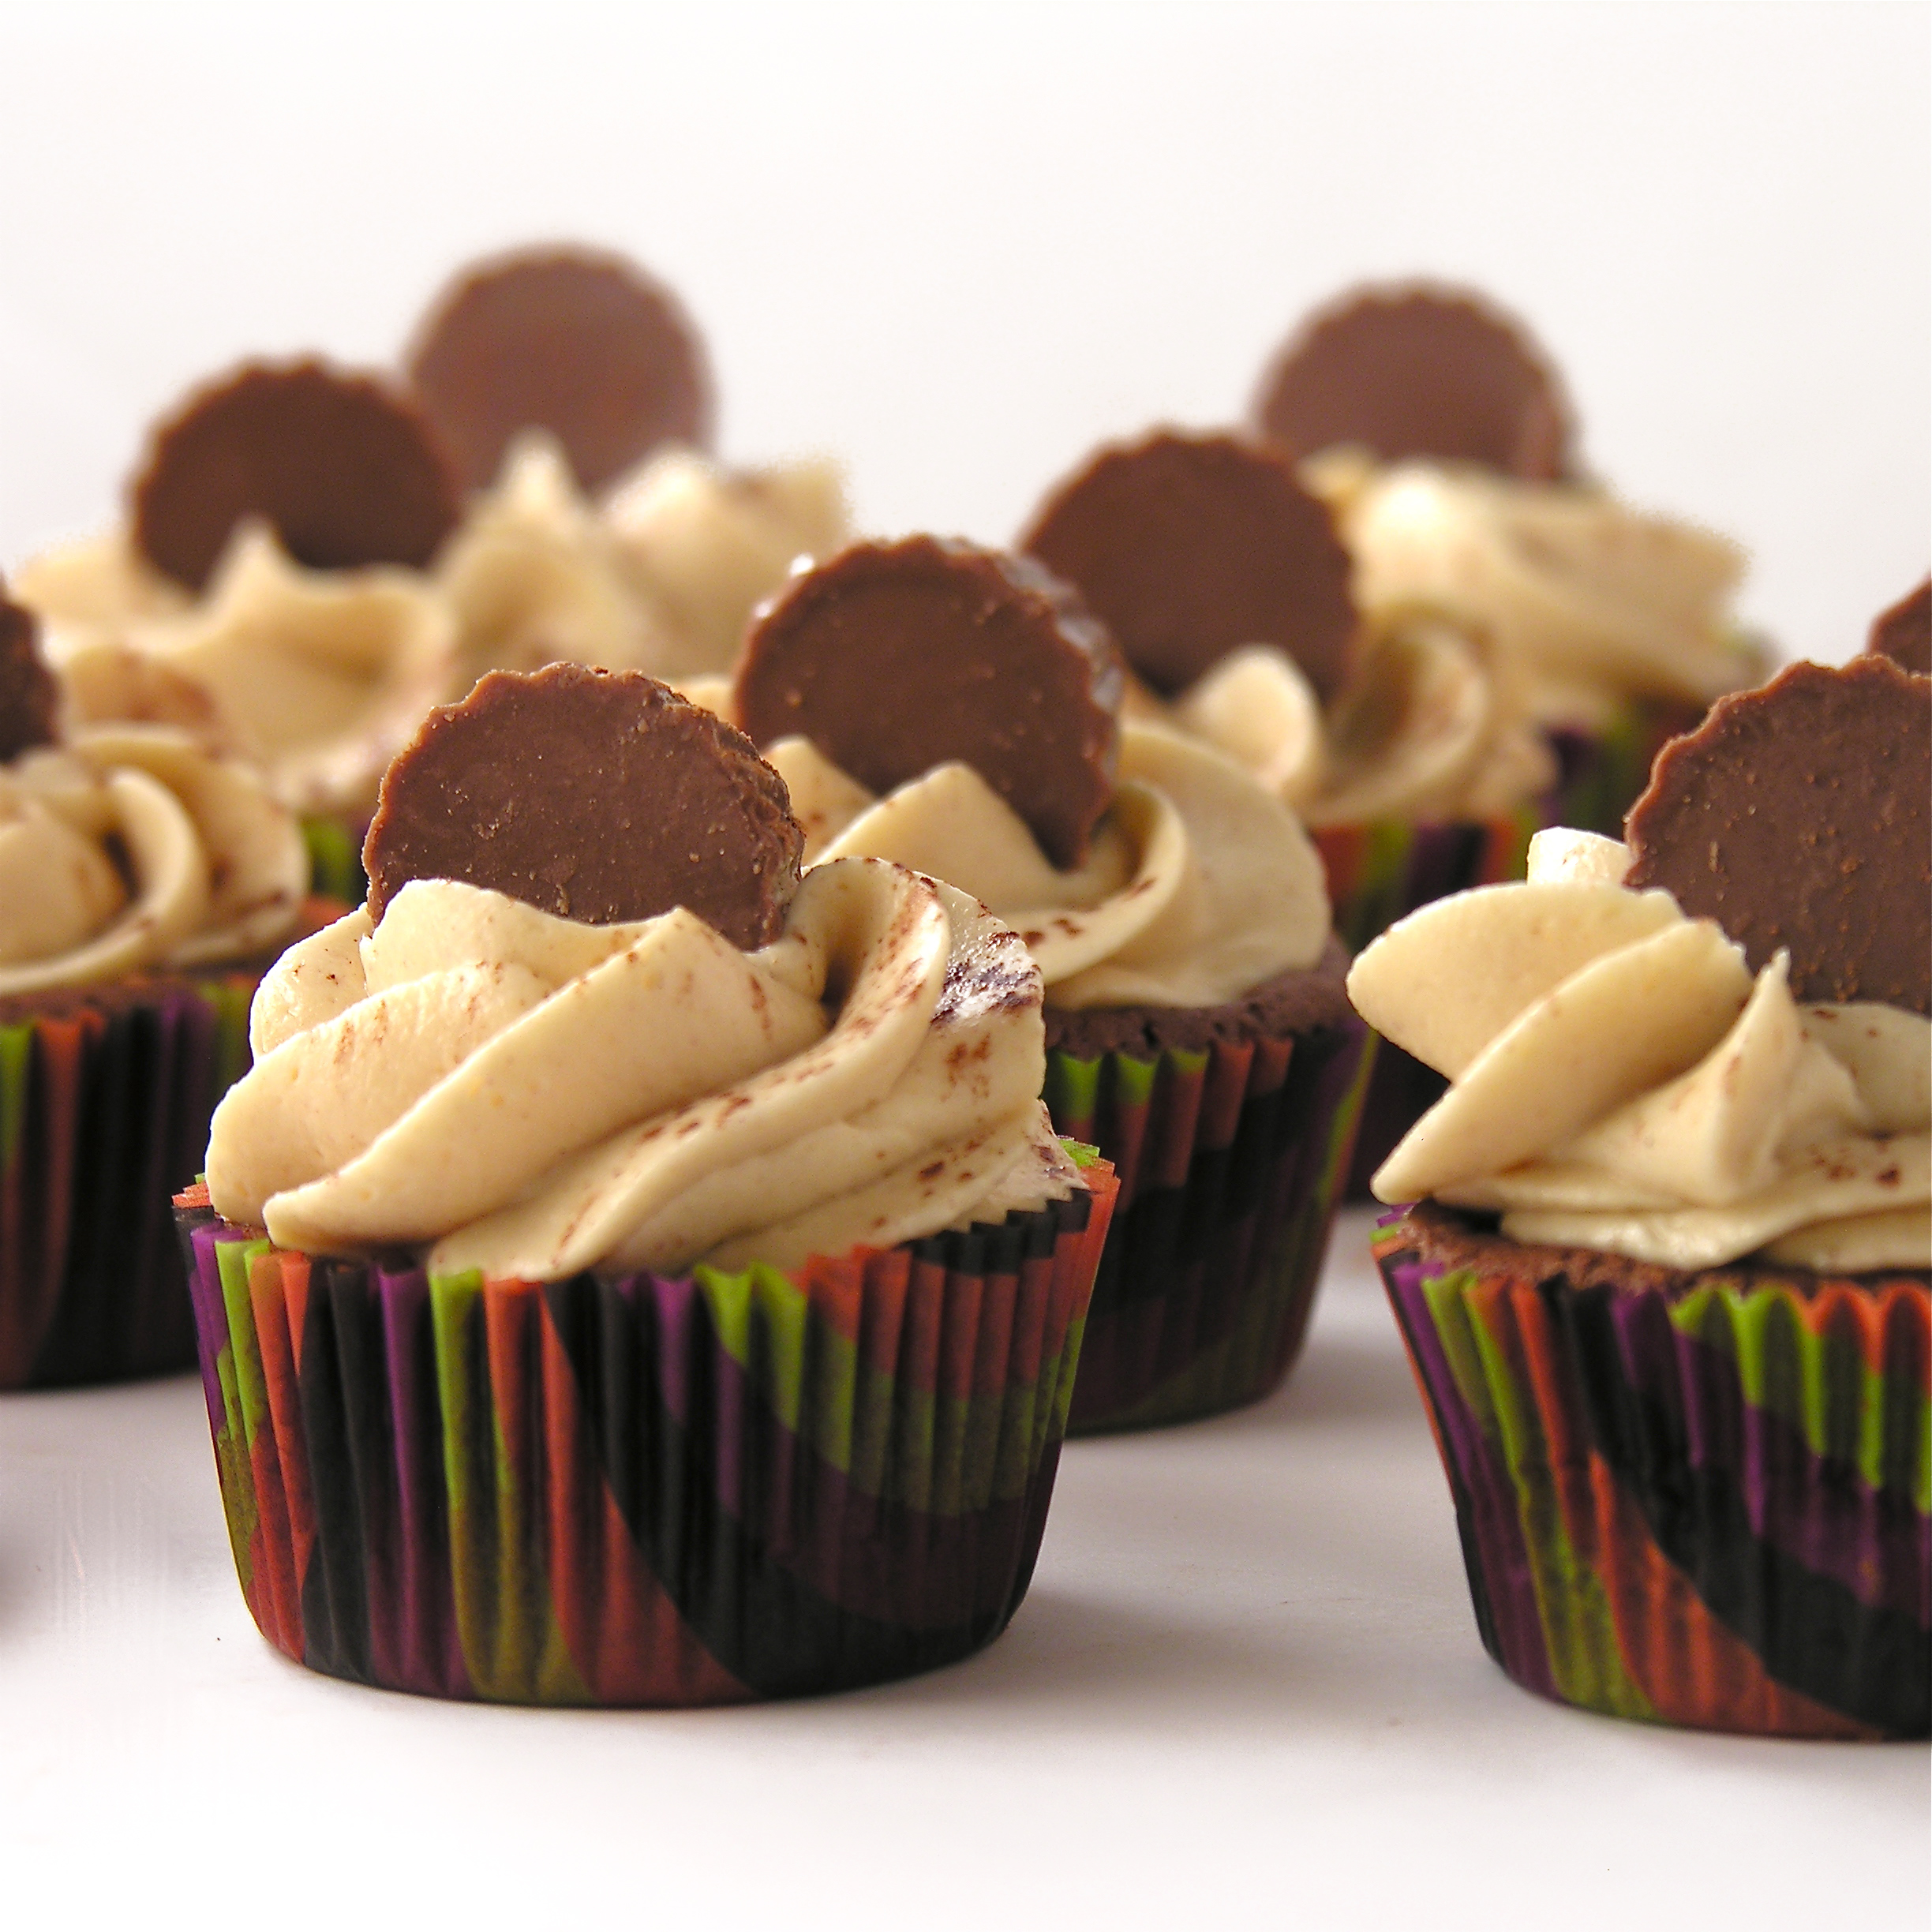 8 Photos of Chocolate Fudge Peanut Butter Cup Cupcakes